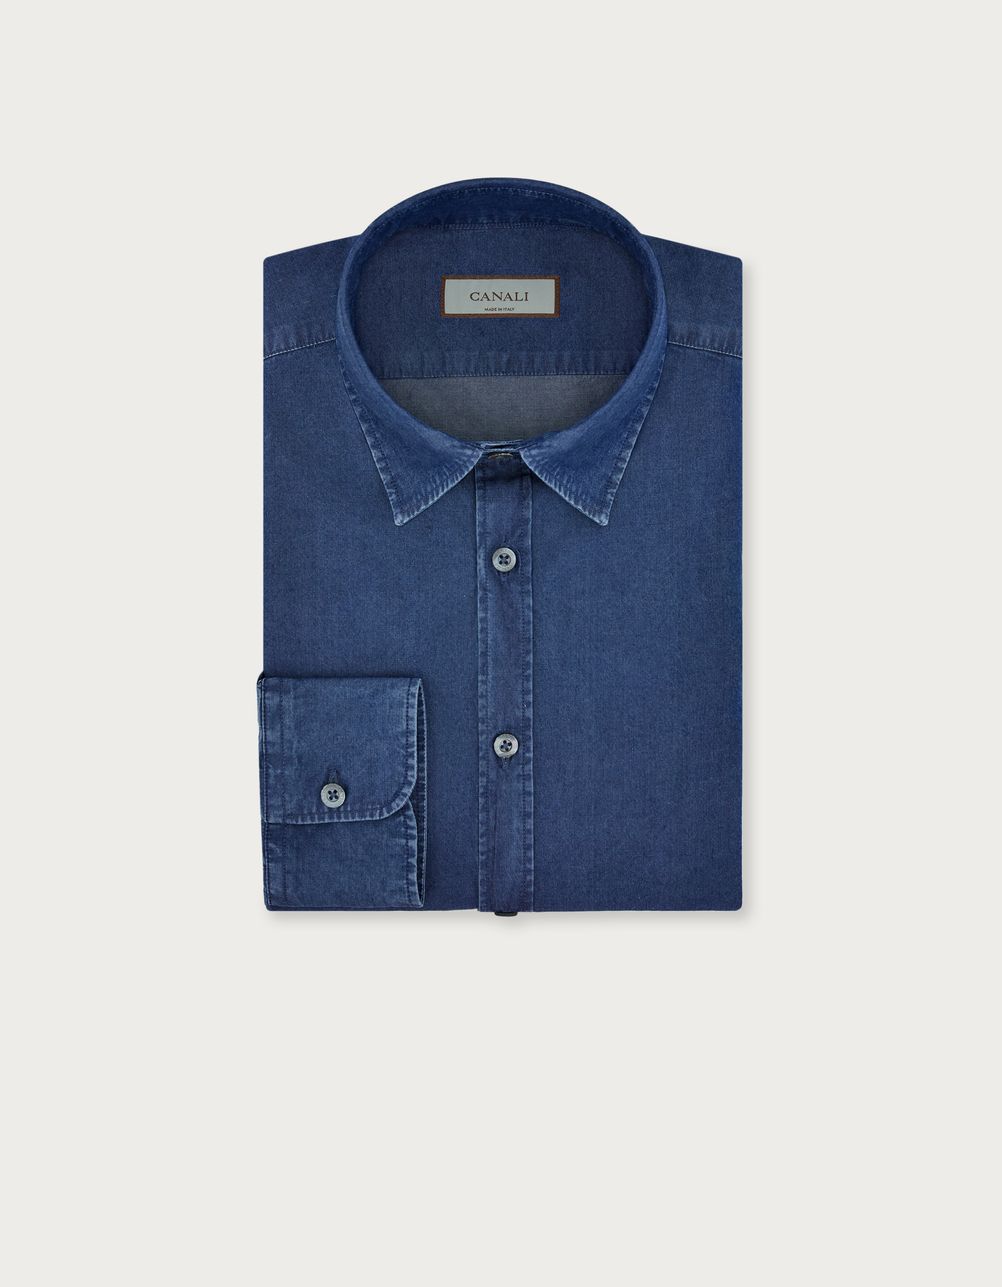 Light blue cotton and lyocell slim-fit shirt